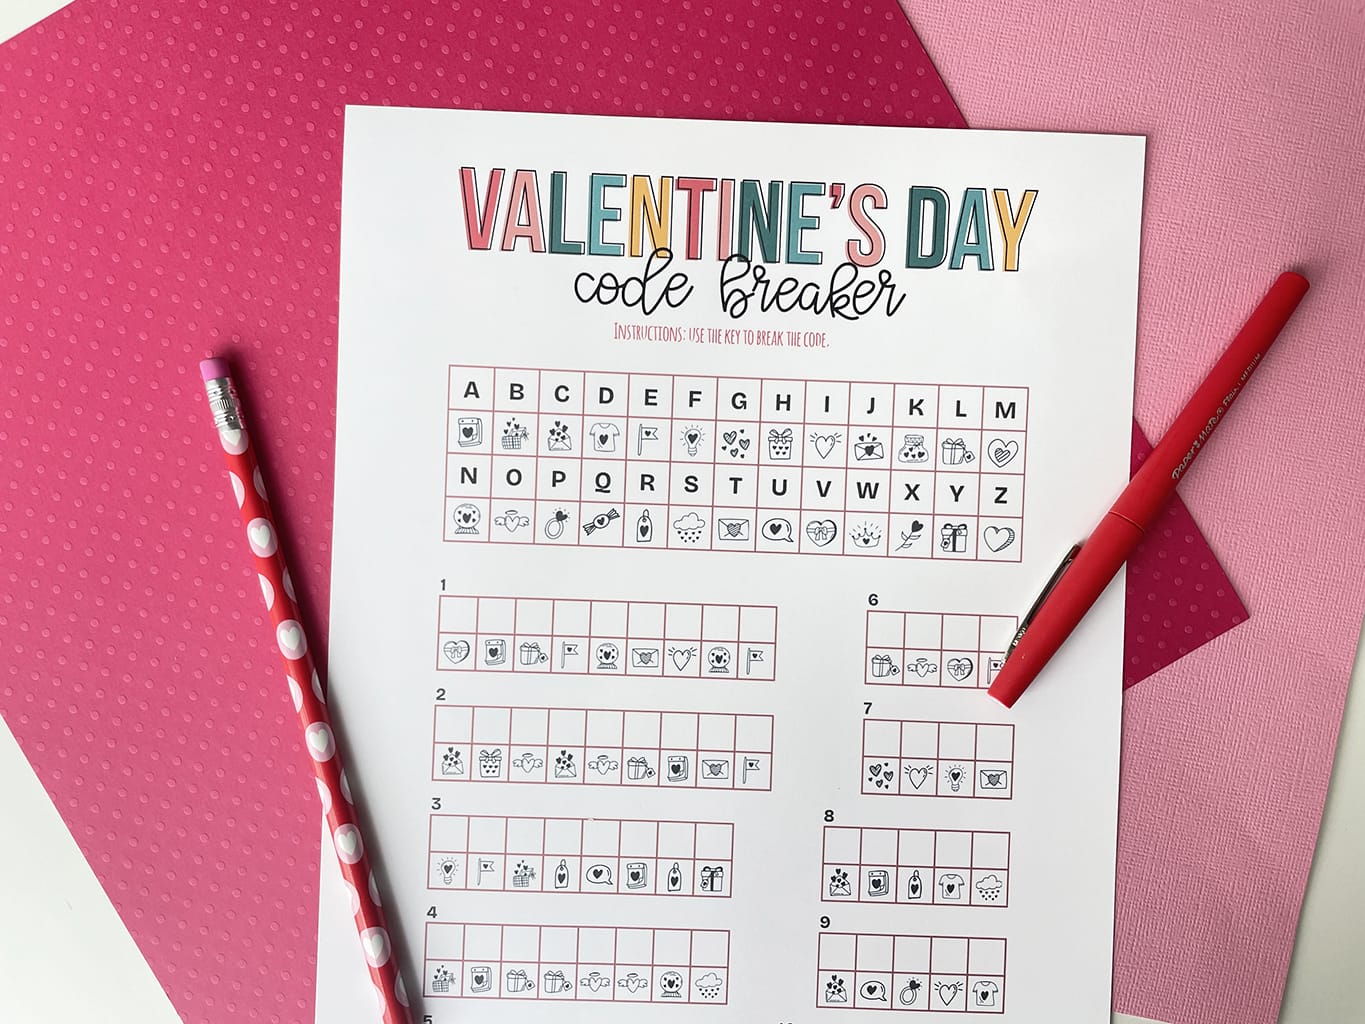 Printable of the Valentine's Day Code Breaker printed out and placed on a white table, with dark pink and light pink paper behind it. Red fine line marker on right and a valentine pencil on the left.